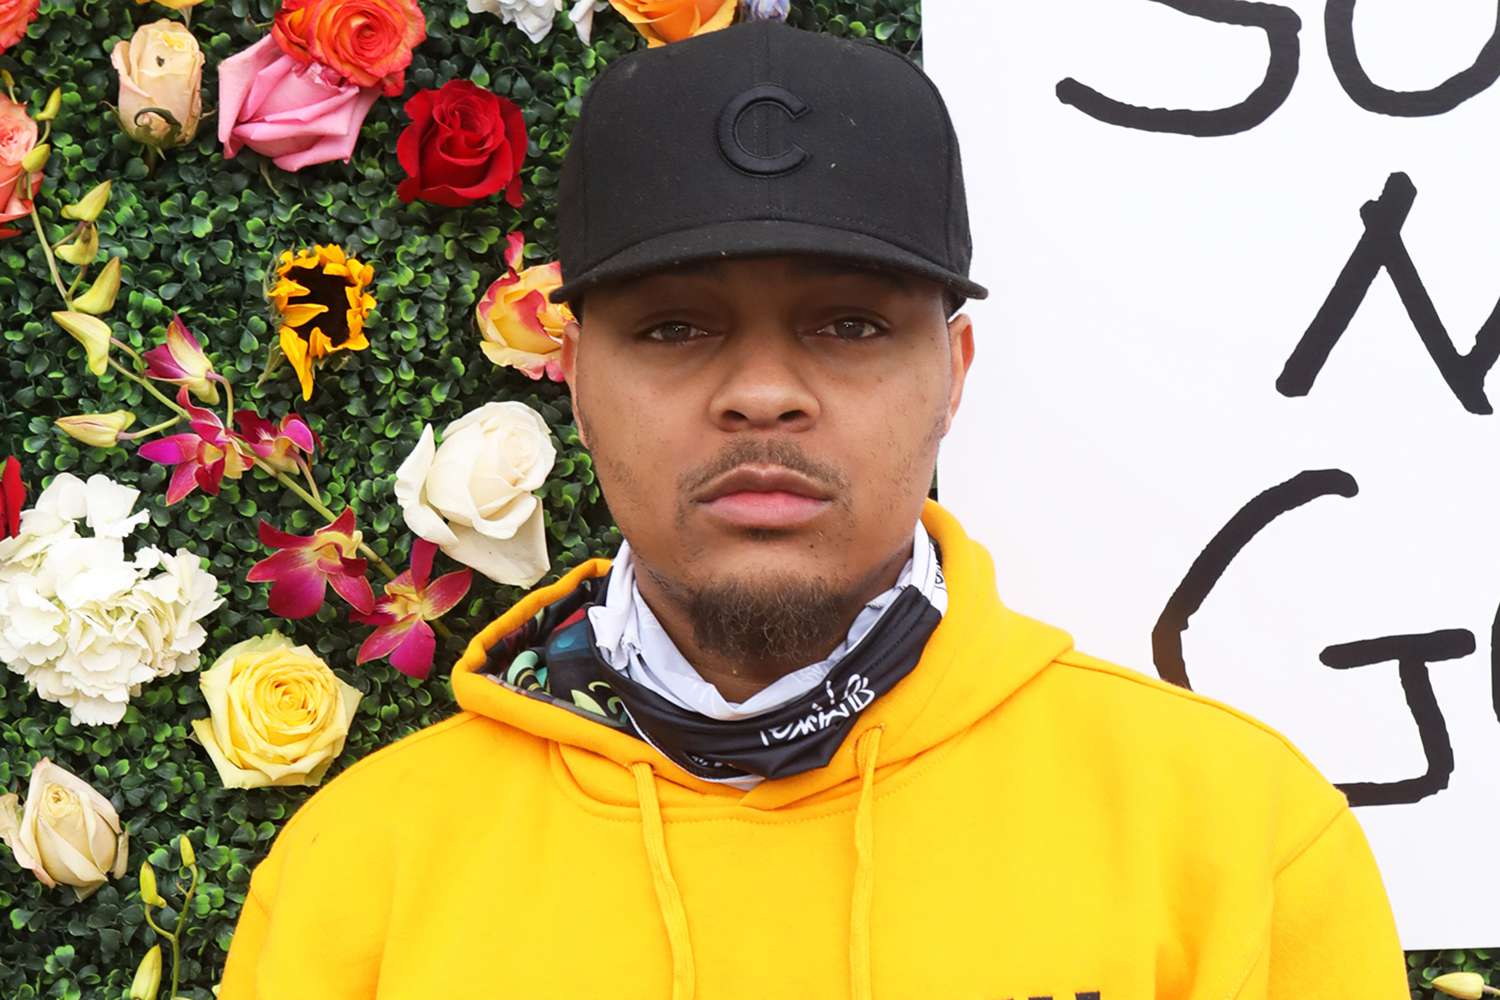 Bow Wow attends The Quarantine Thick Brunch at Breakfast at Barney's on November 8, 2020 in Atlanta, Georgia.